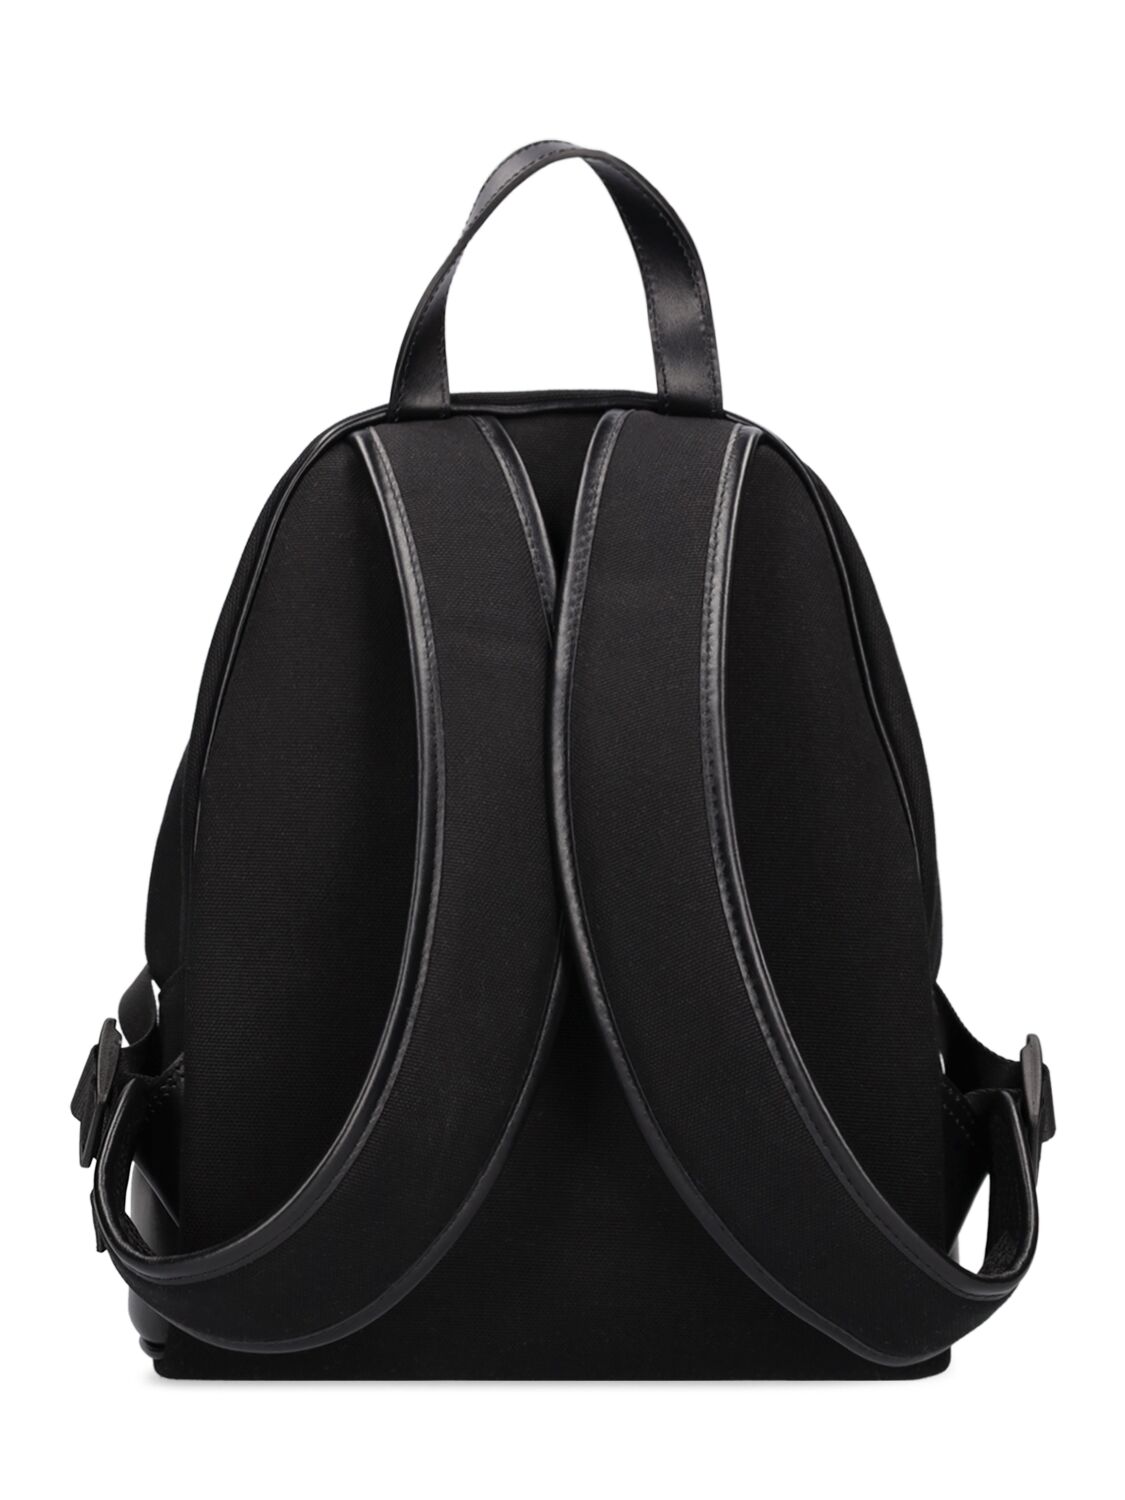 Shop Balmain Cotton Canvas & Leather Backpack In Black